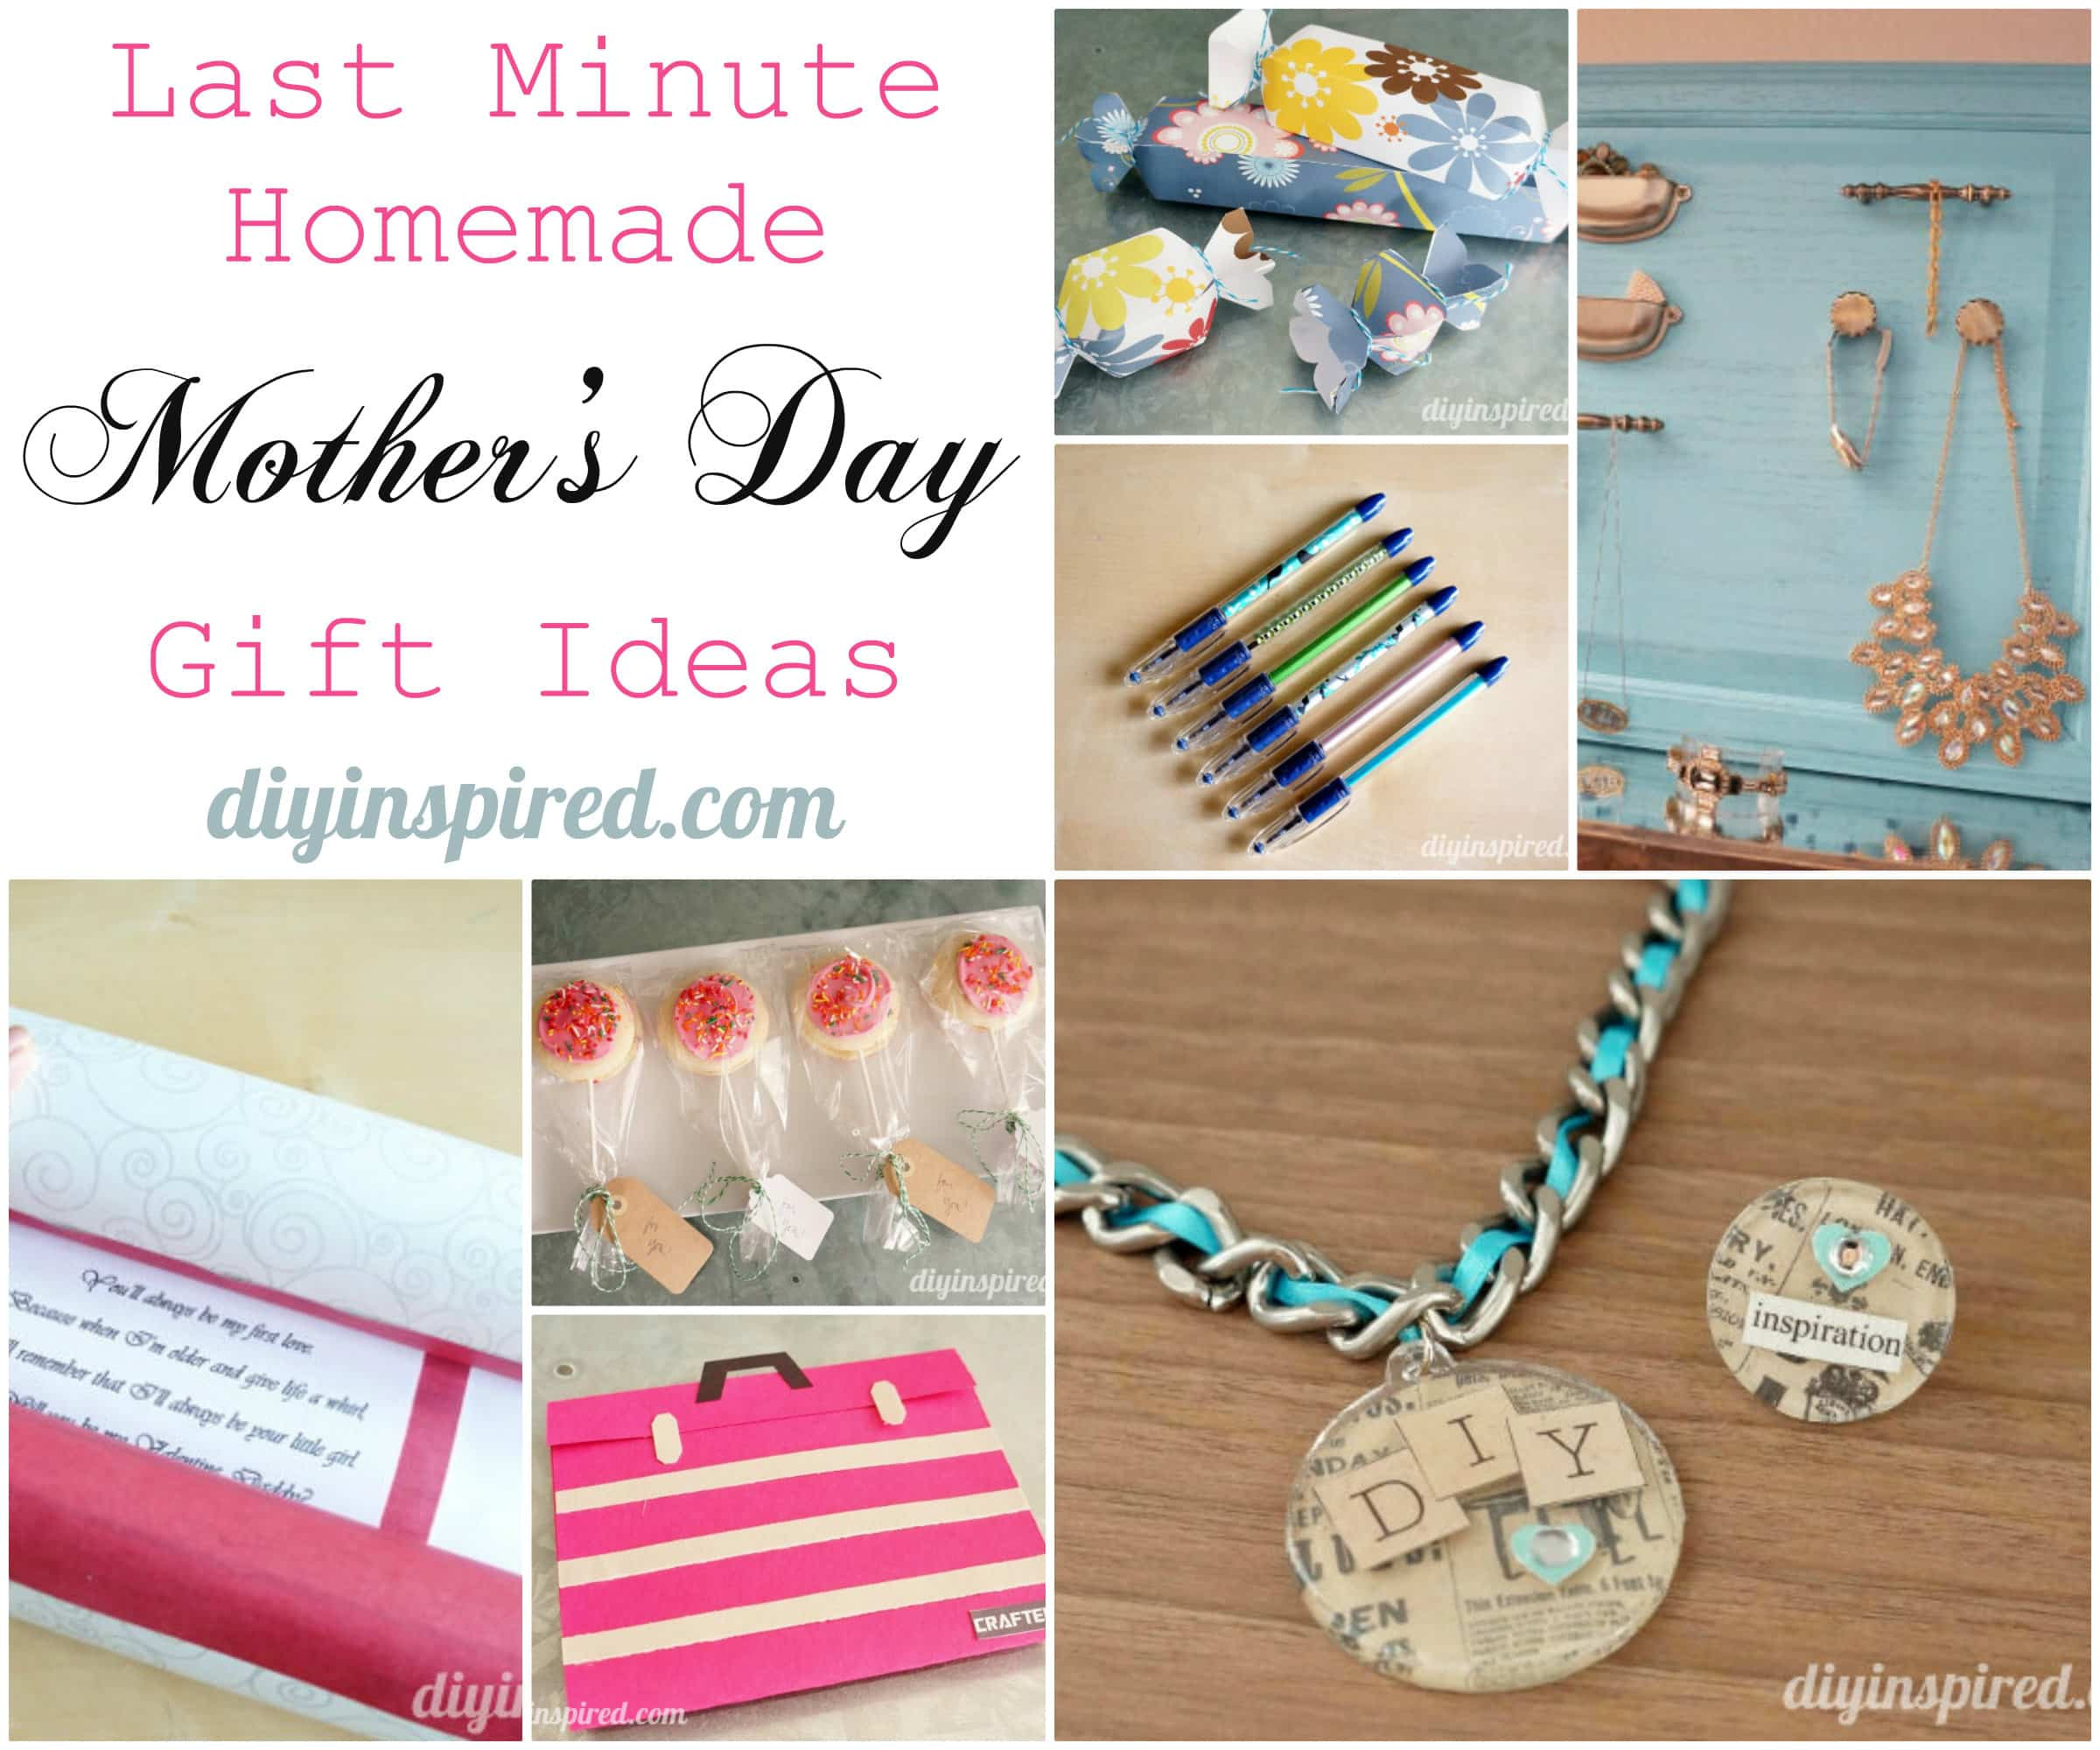 Last Minute DIY Gift Ideas
 Last Minute Homemade Mother’s Day Gift Ideas DIY Inspired